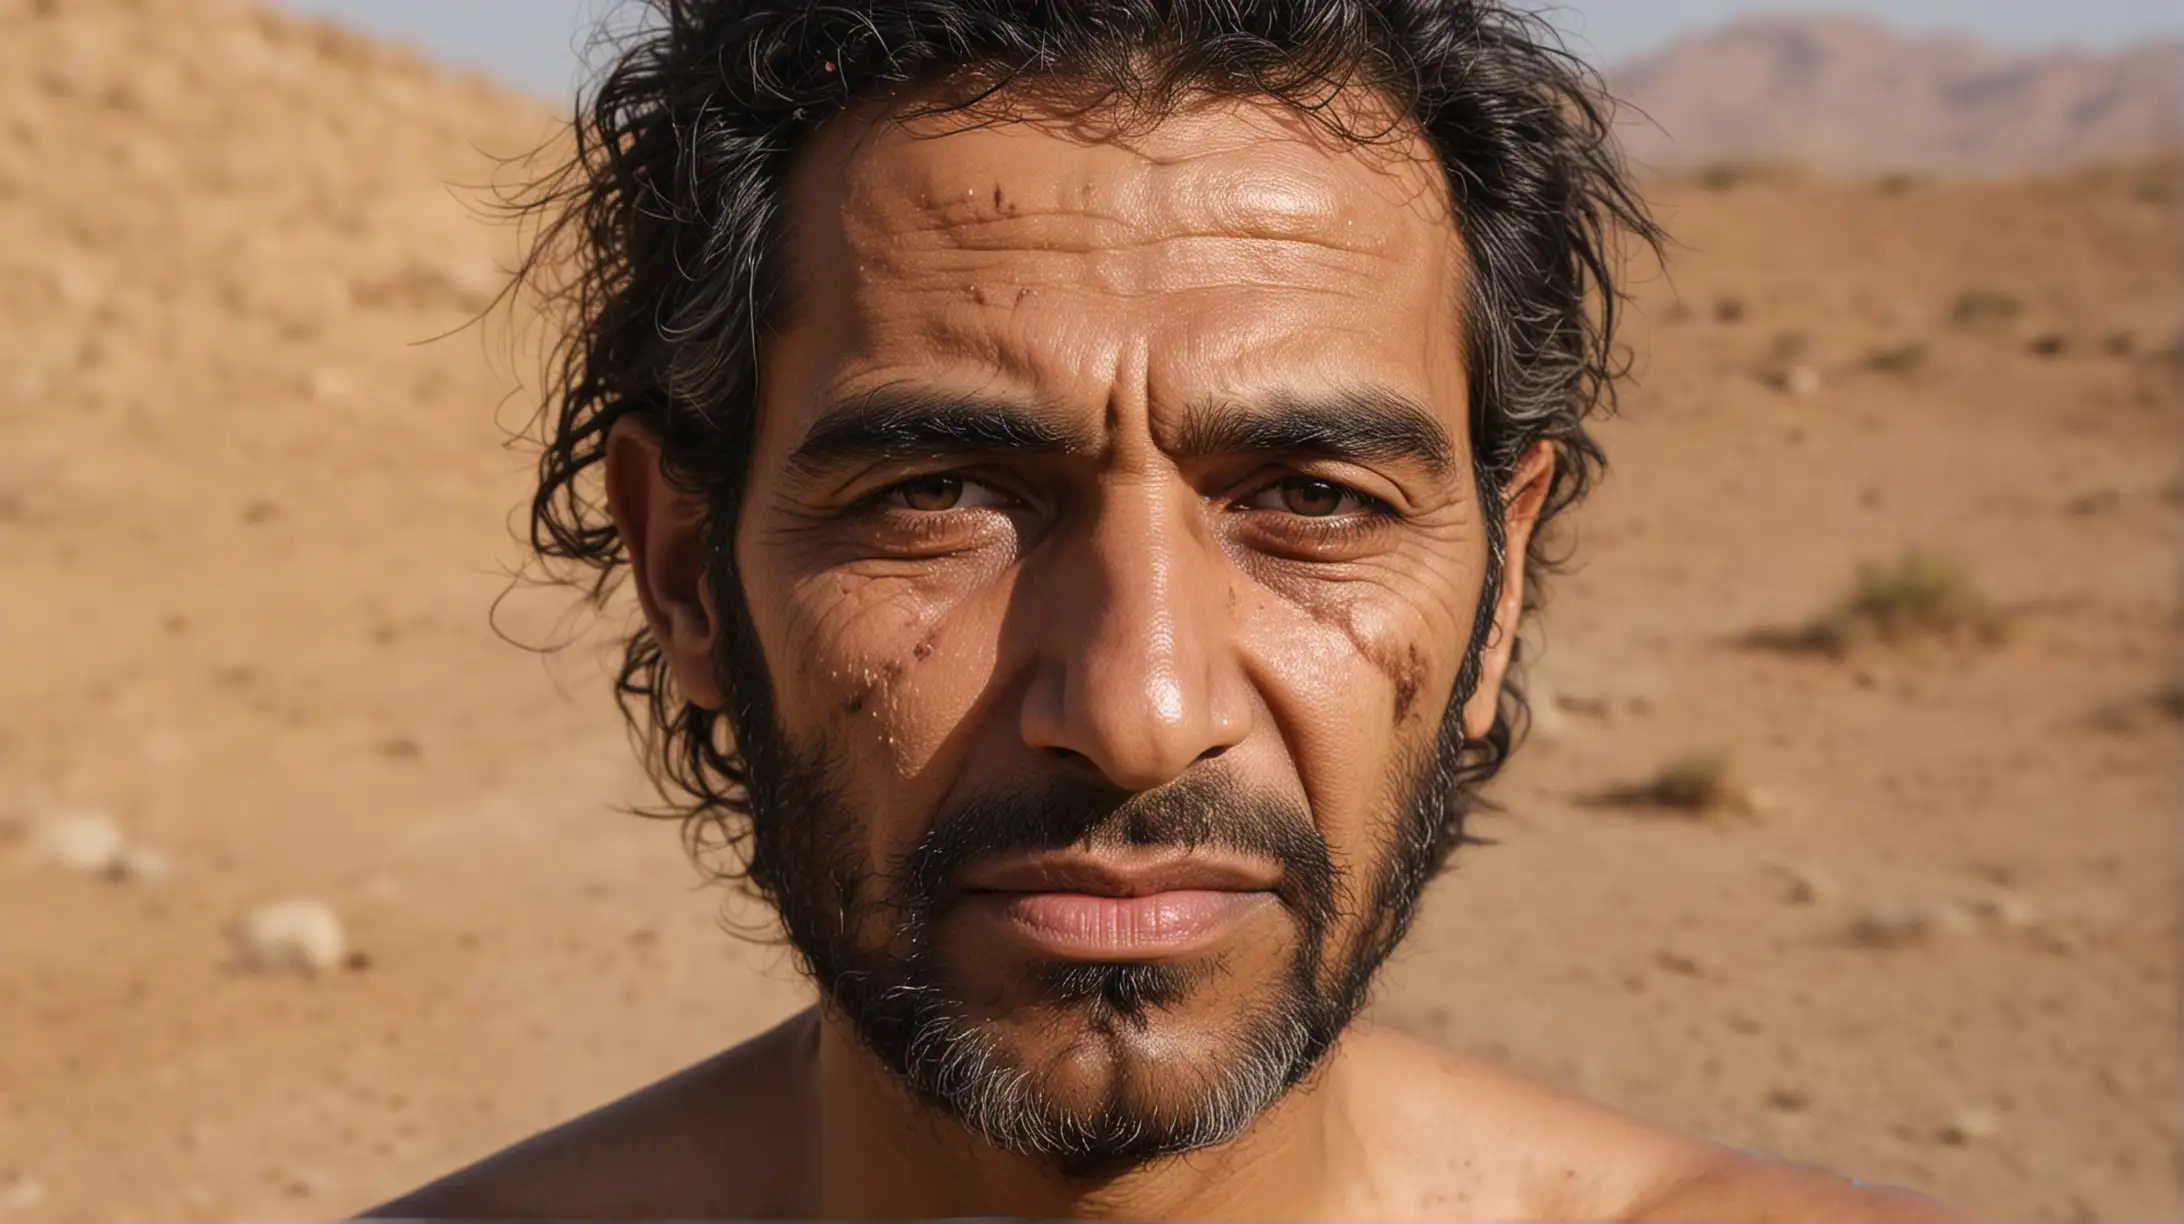 A close up of a 50 year old Middle Eastern man who has skin problems, rashes, leprocy, boils, in a desert location, Set during the era of the Biblical Moses.